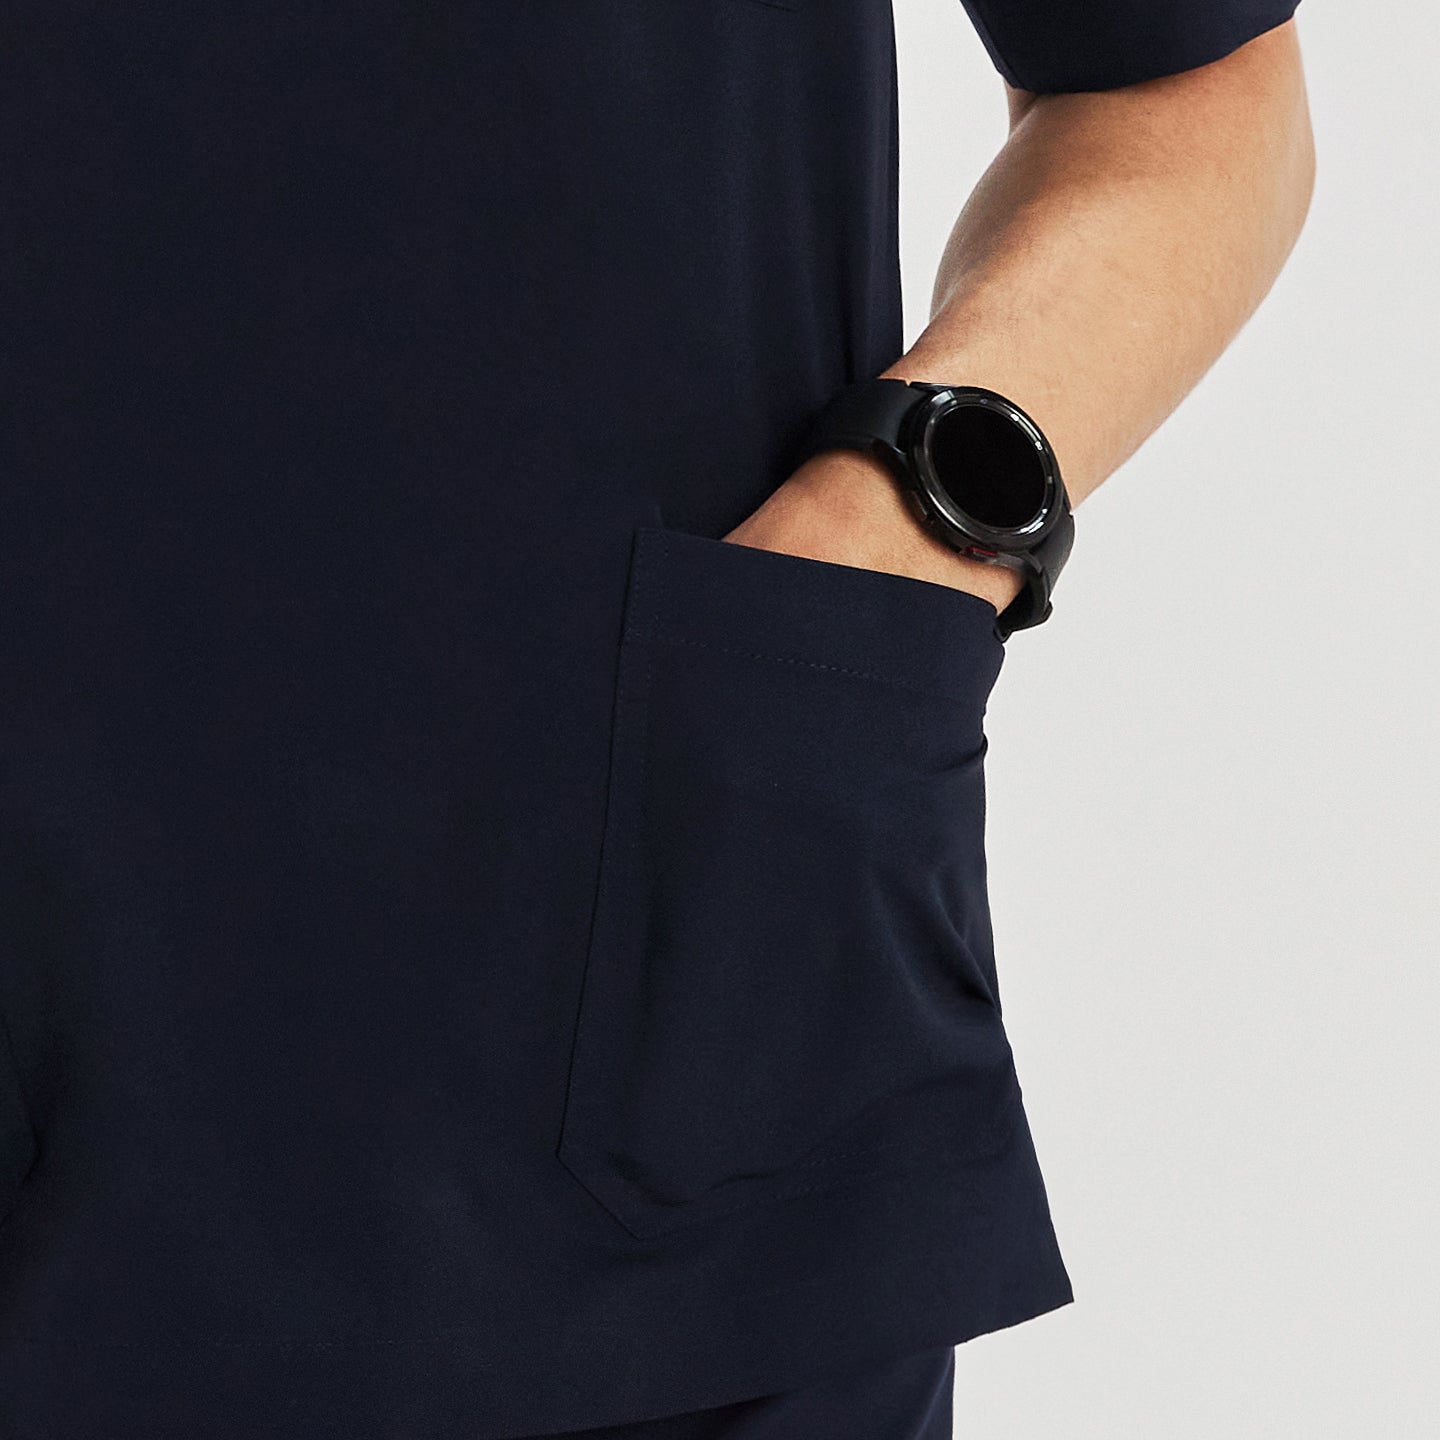 Close-up view of a man wearing a scrub top, focusing on the pocket detail with his hand inside the pocket and a smartwatch on his wrist,Navy